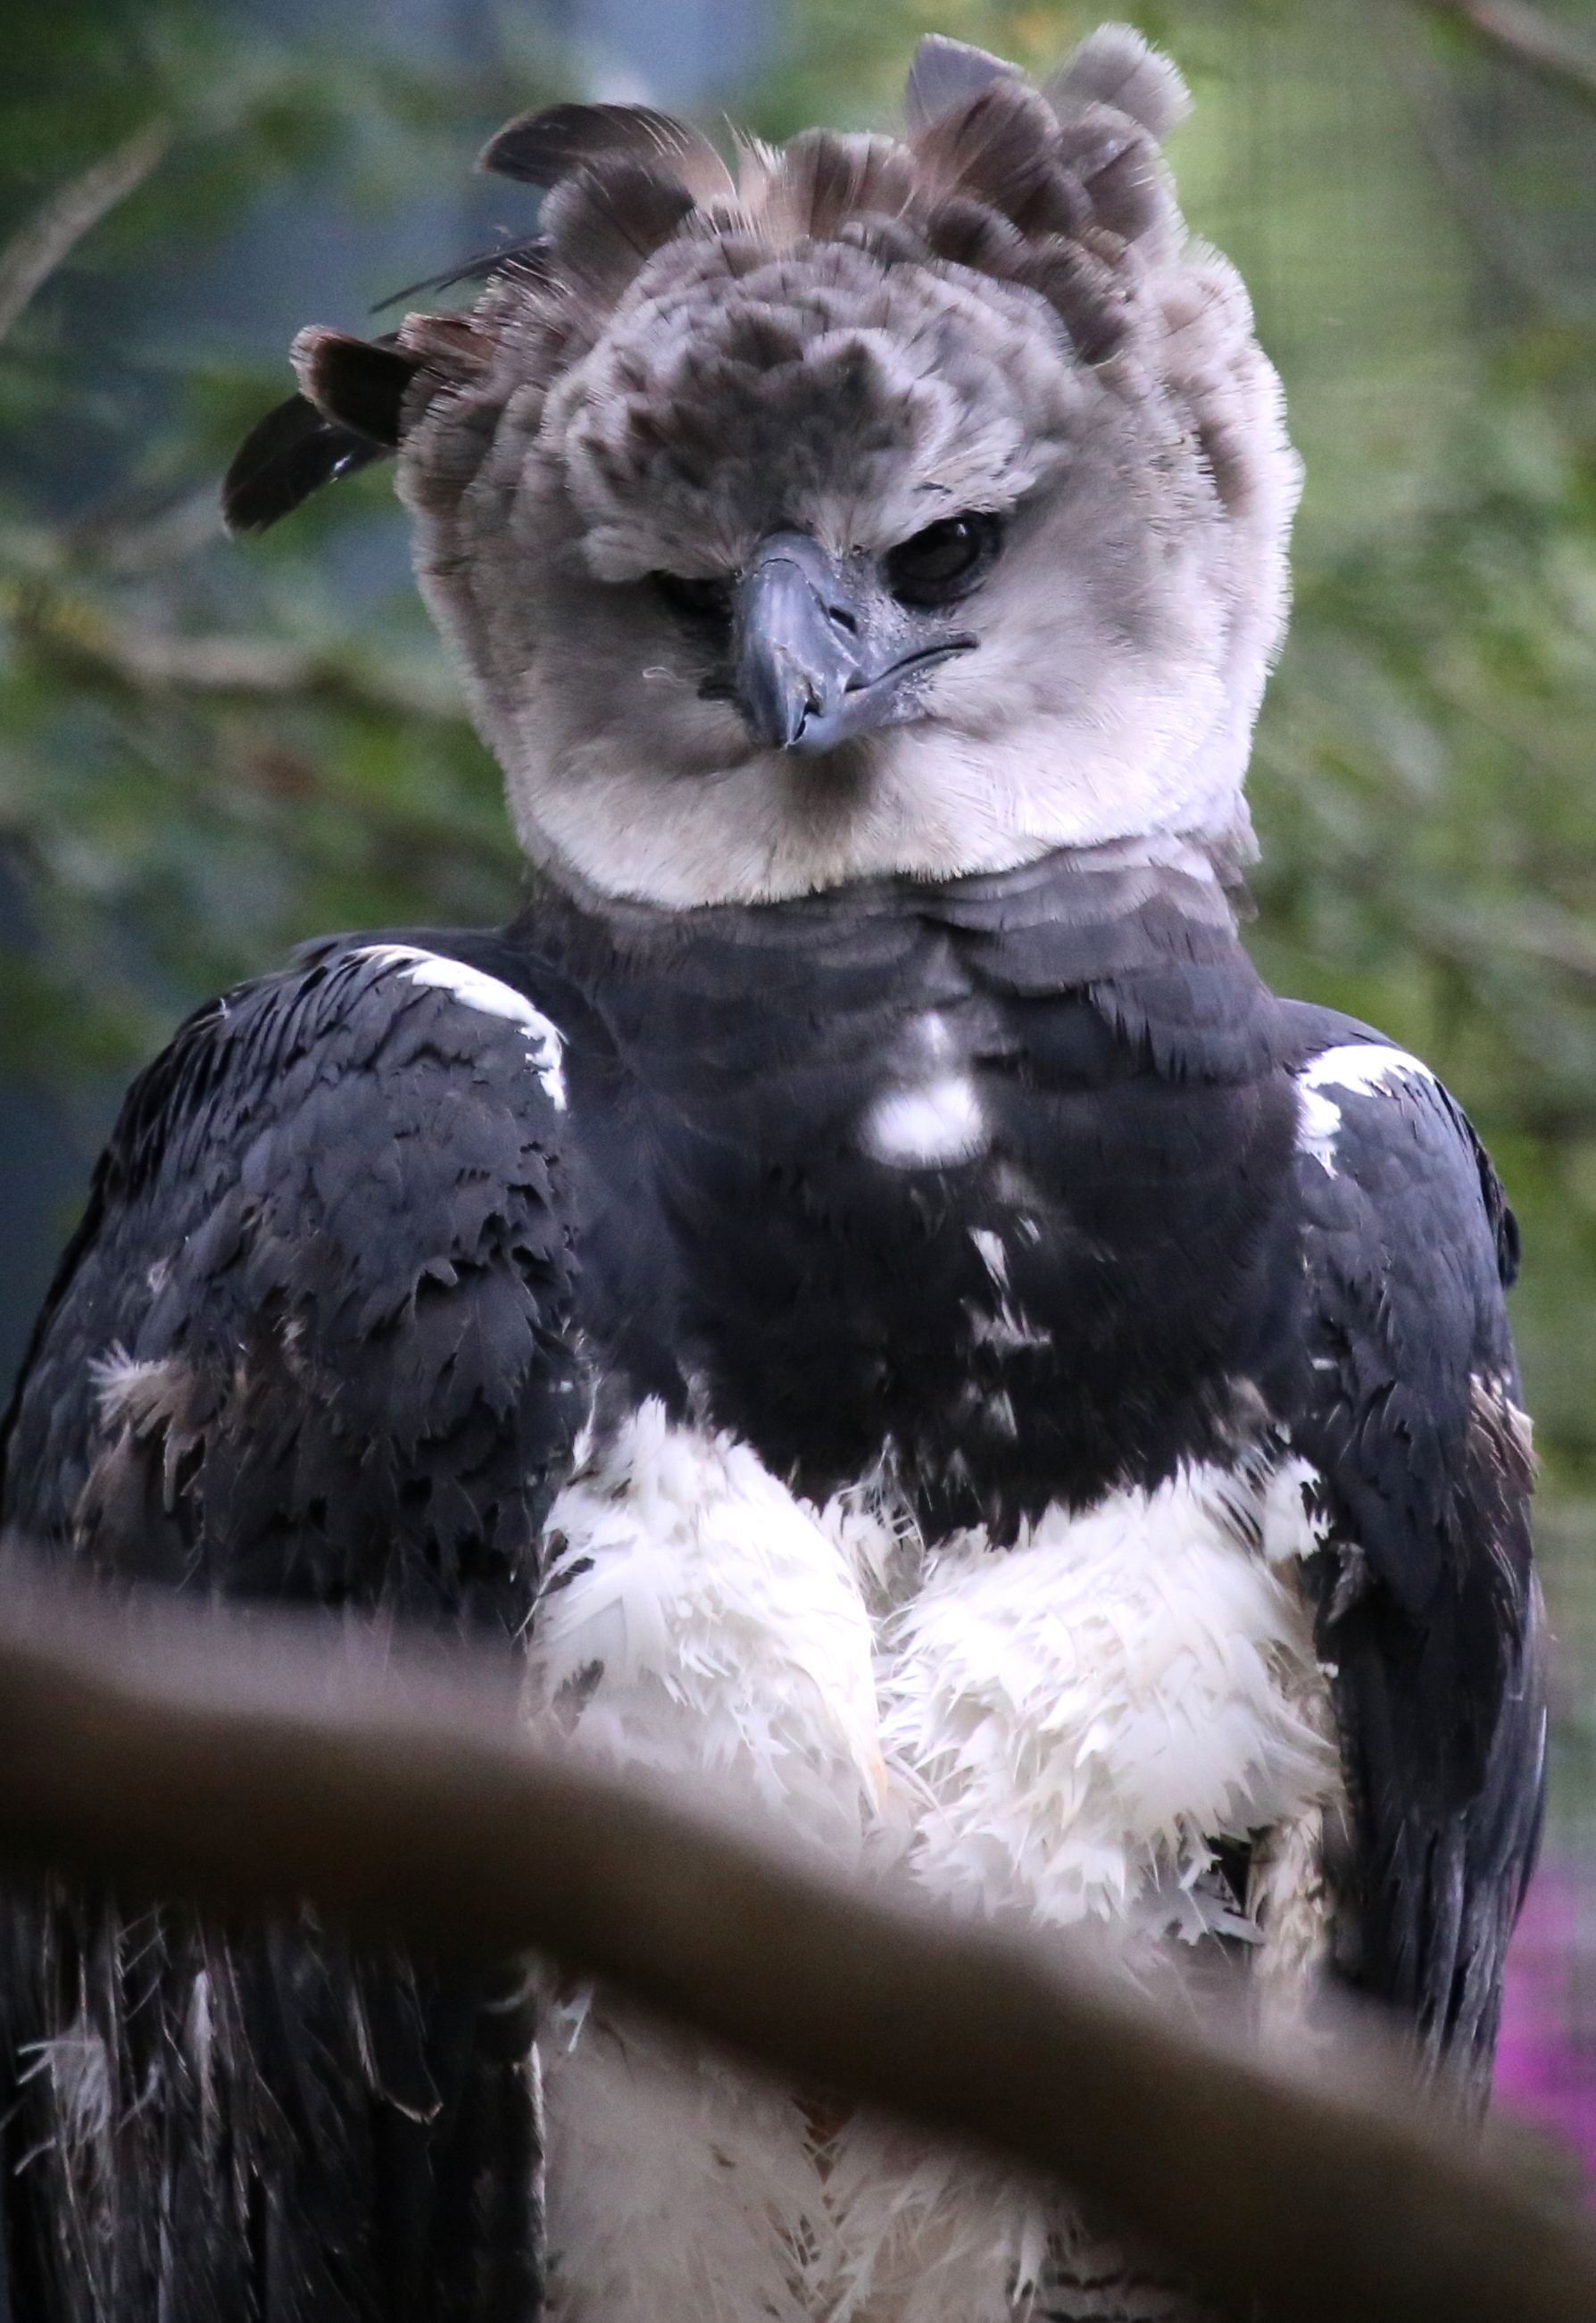 Harpy Eagle resting on branch. Photo taken by cuatrok77, published on Flickr